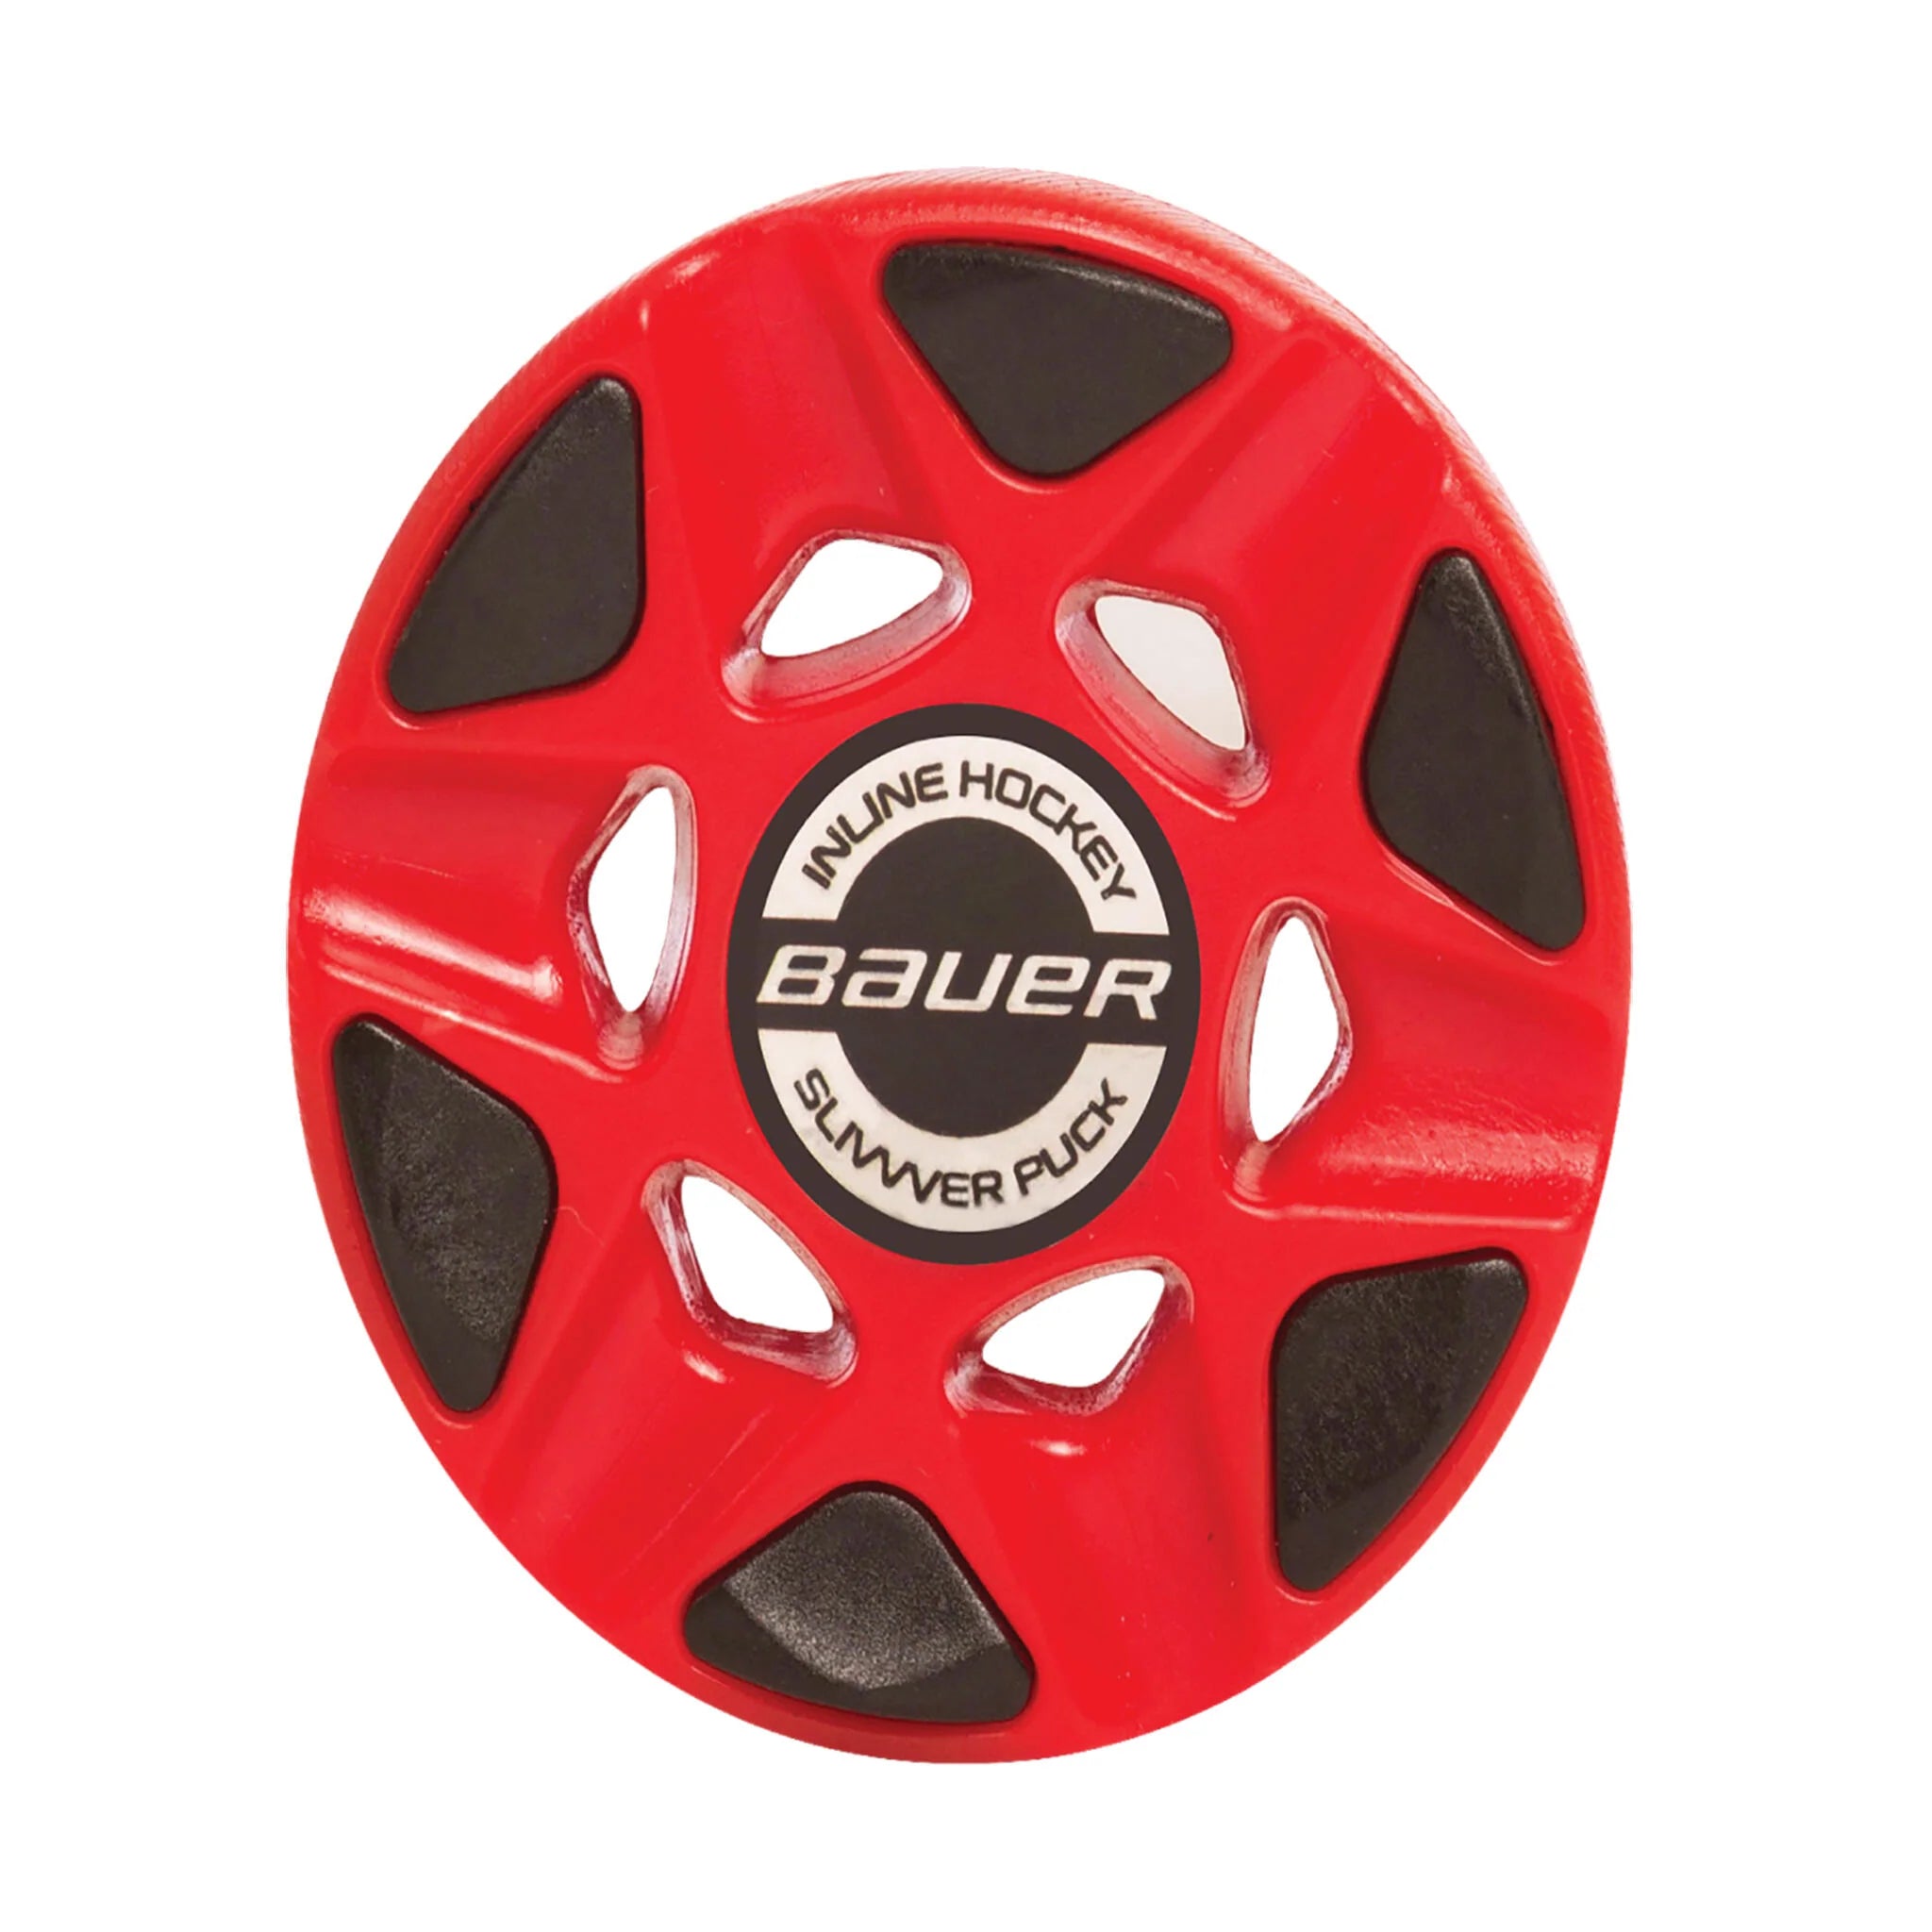 Bauer Slivvver Roller Hockey Puck-Bauer-Sports Replay - Sports Excellence